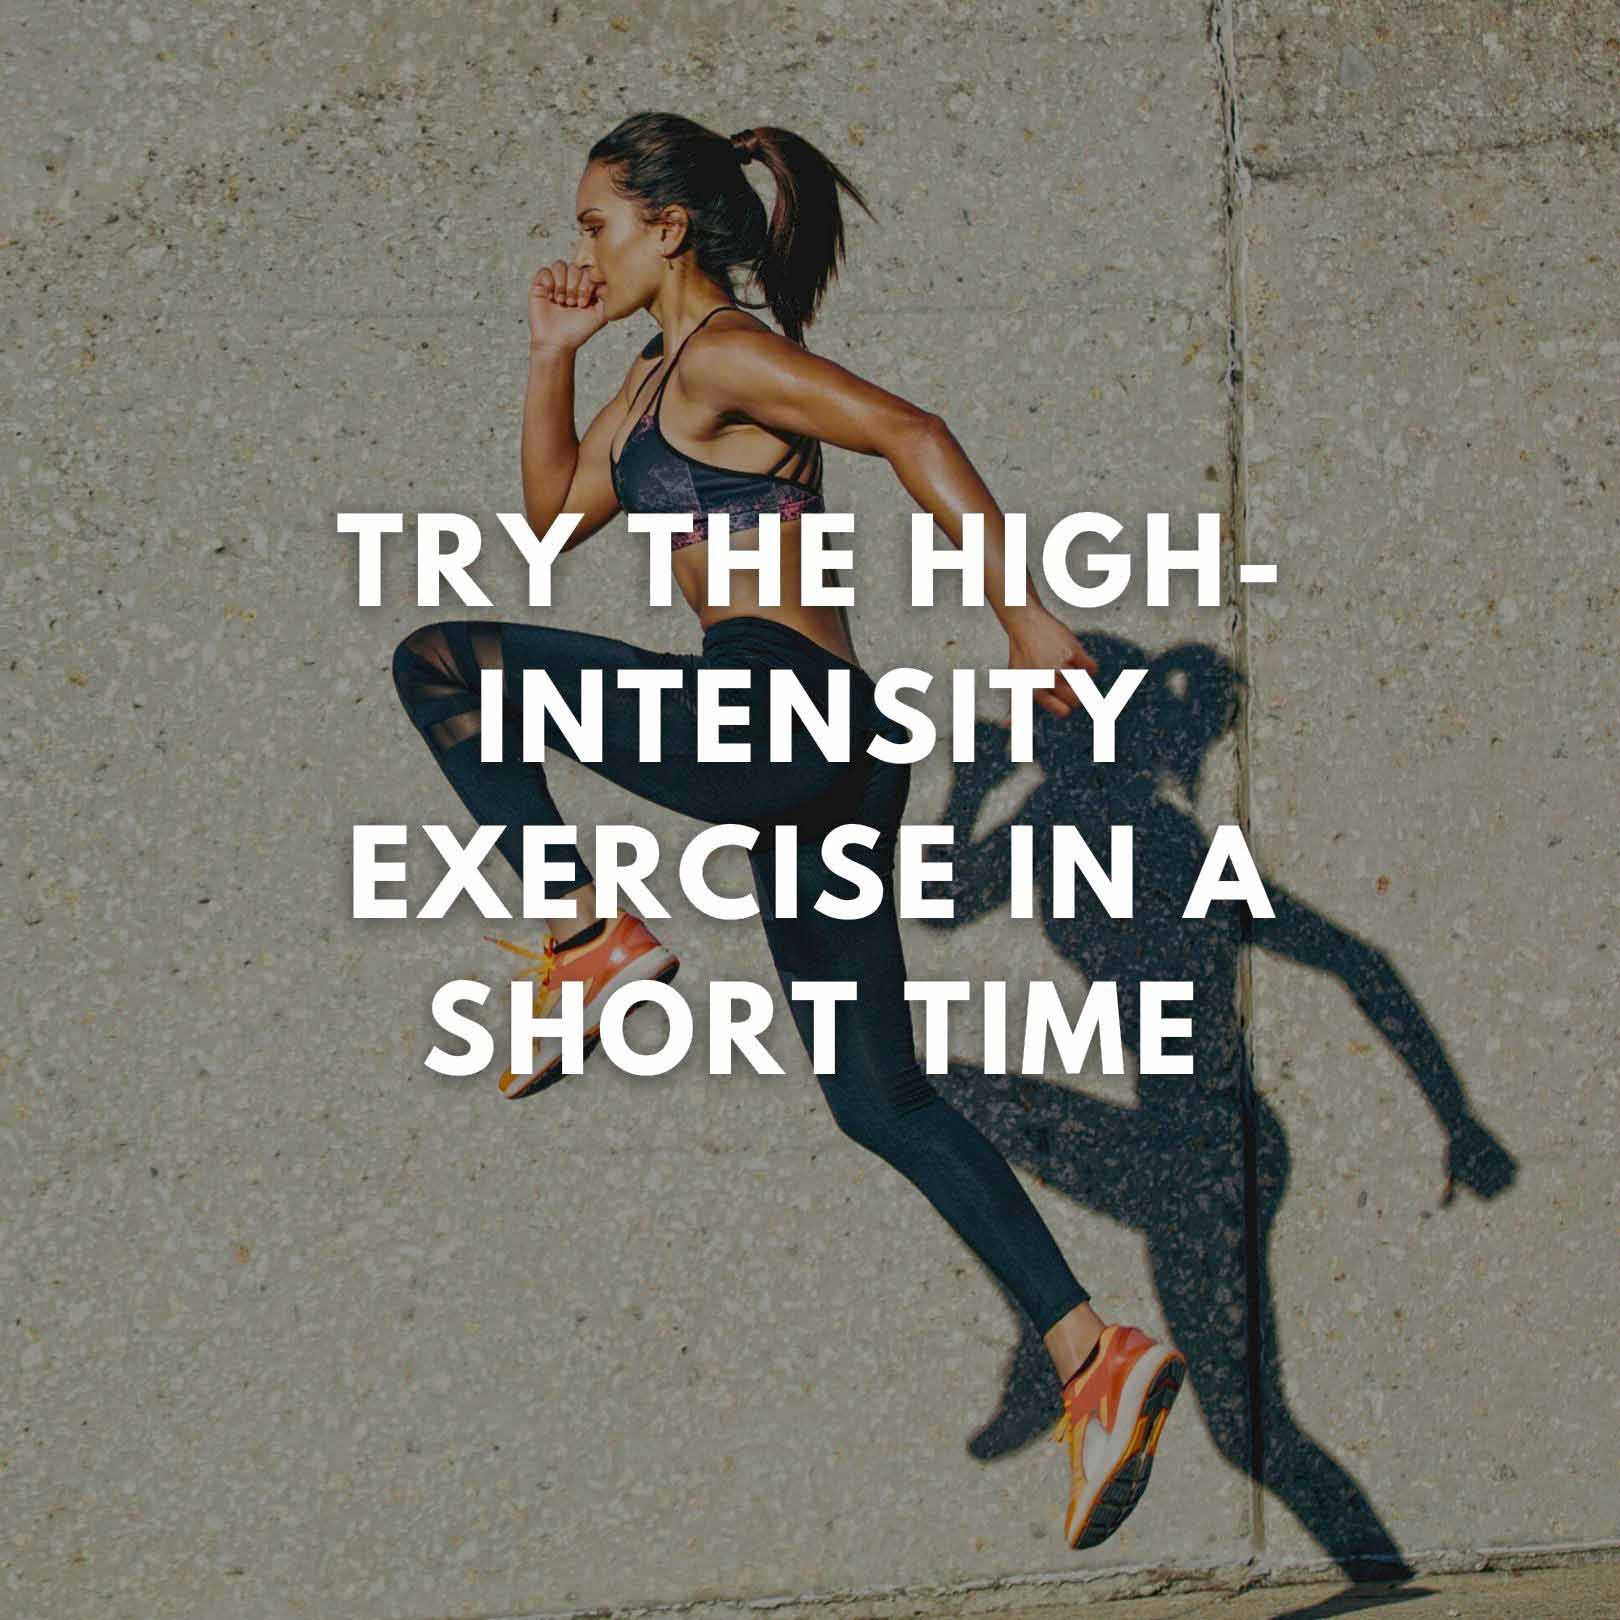 High-intensity exercise in a short time